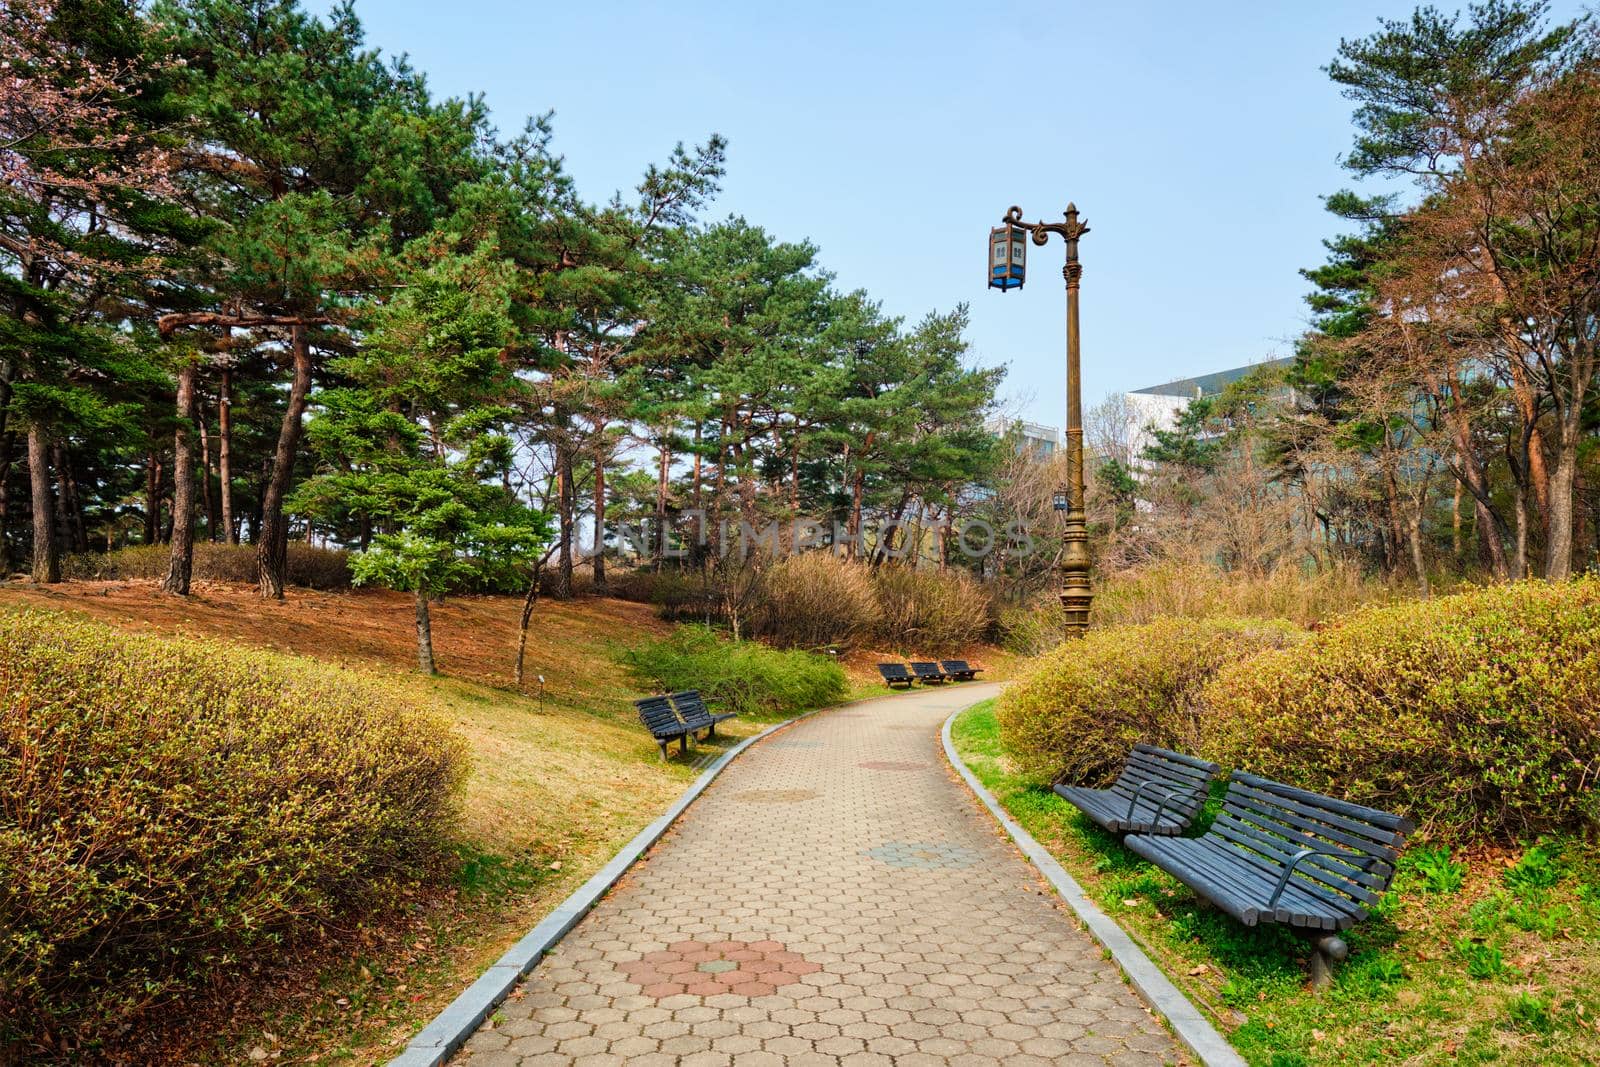 Pathwalk with benches in Yeouido Park public park in Seoul, Korea